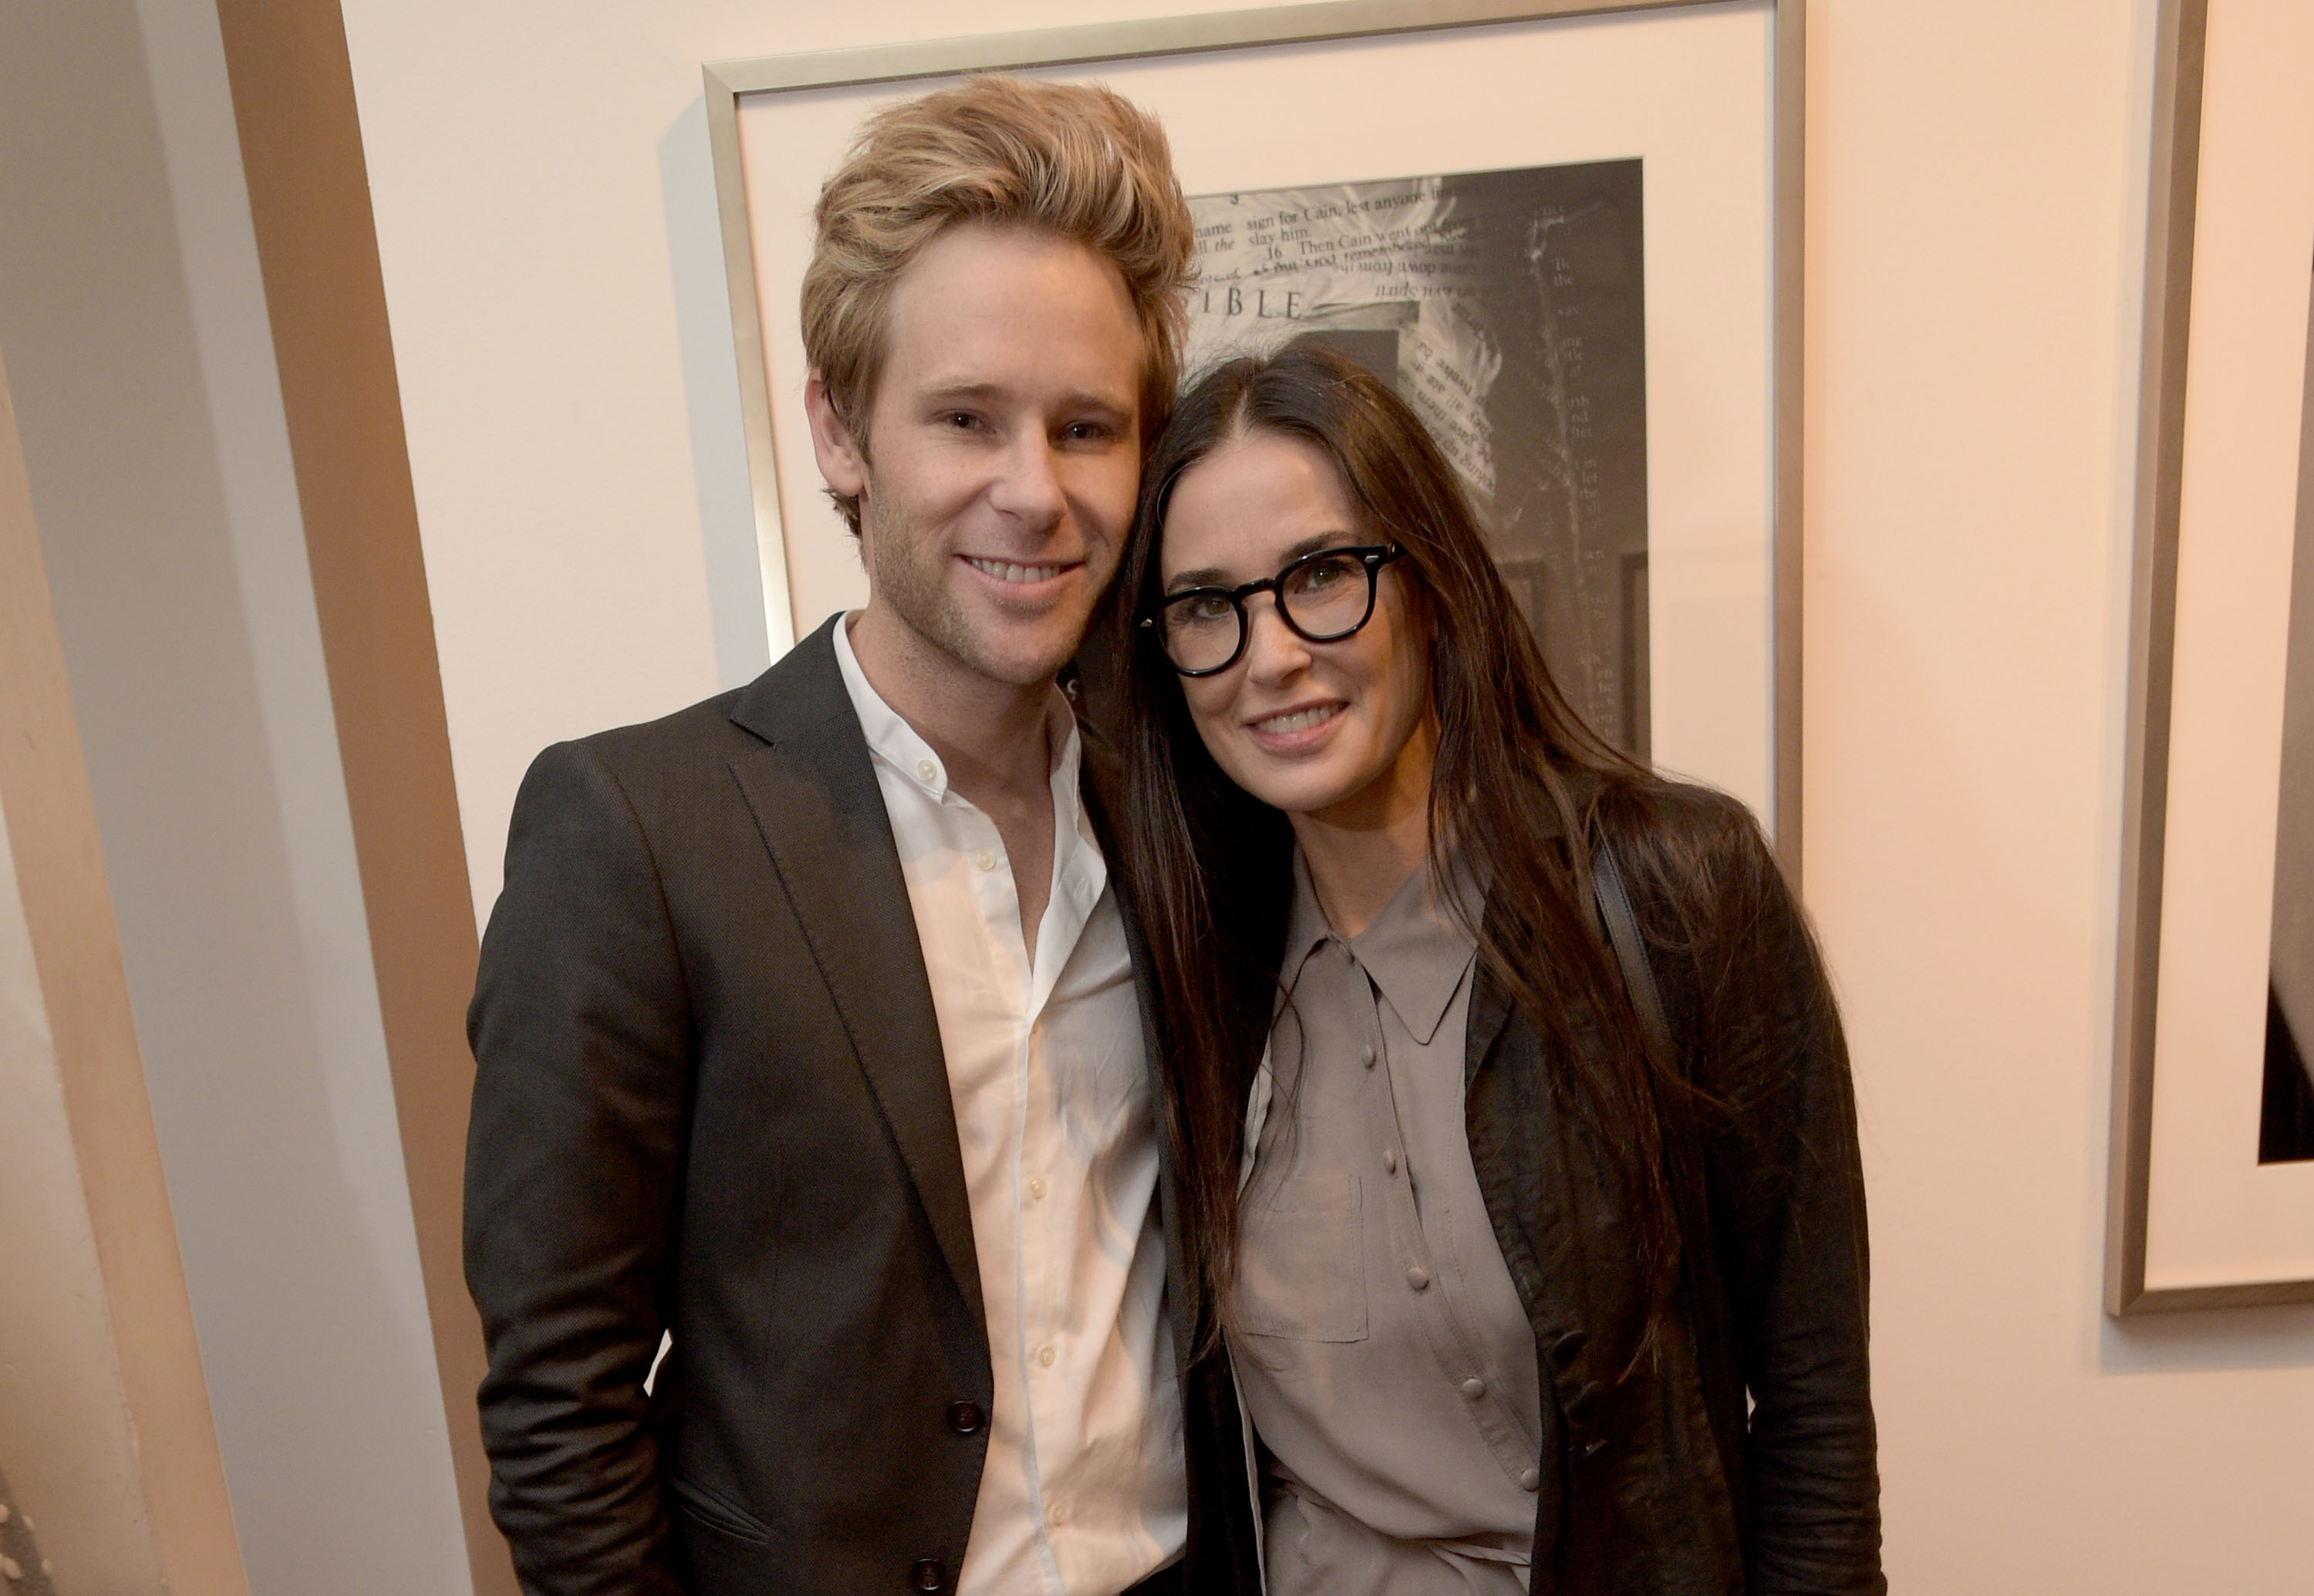 We. Alone. A photography Exhibit by Bryan Fox LOS ANGELES, CA - MAY 09: Artist Bryan Fox (L) and actress Demi Moore attend We. Alone. A photography exhibit by Bryan Fox at Think Tank Gallery on May 9, 2015 in Los Angeles, California.